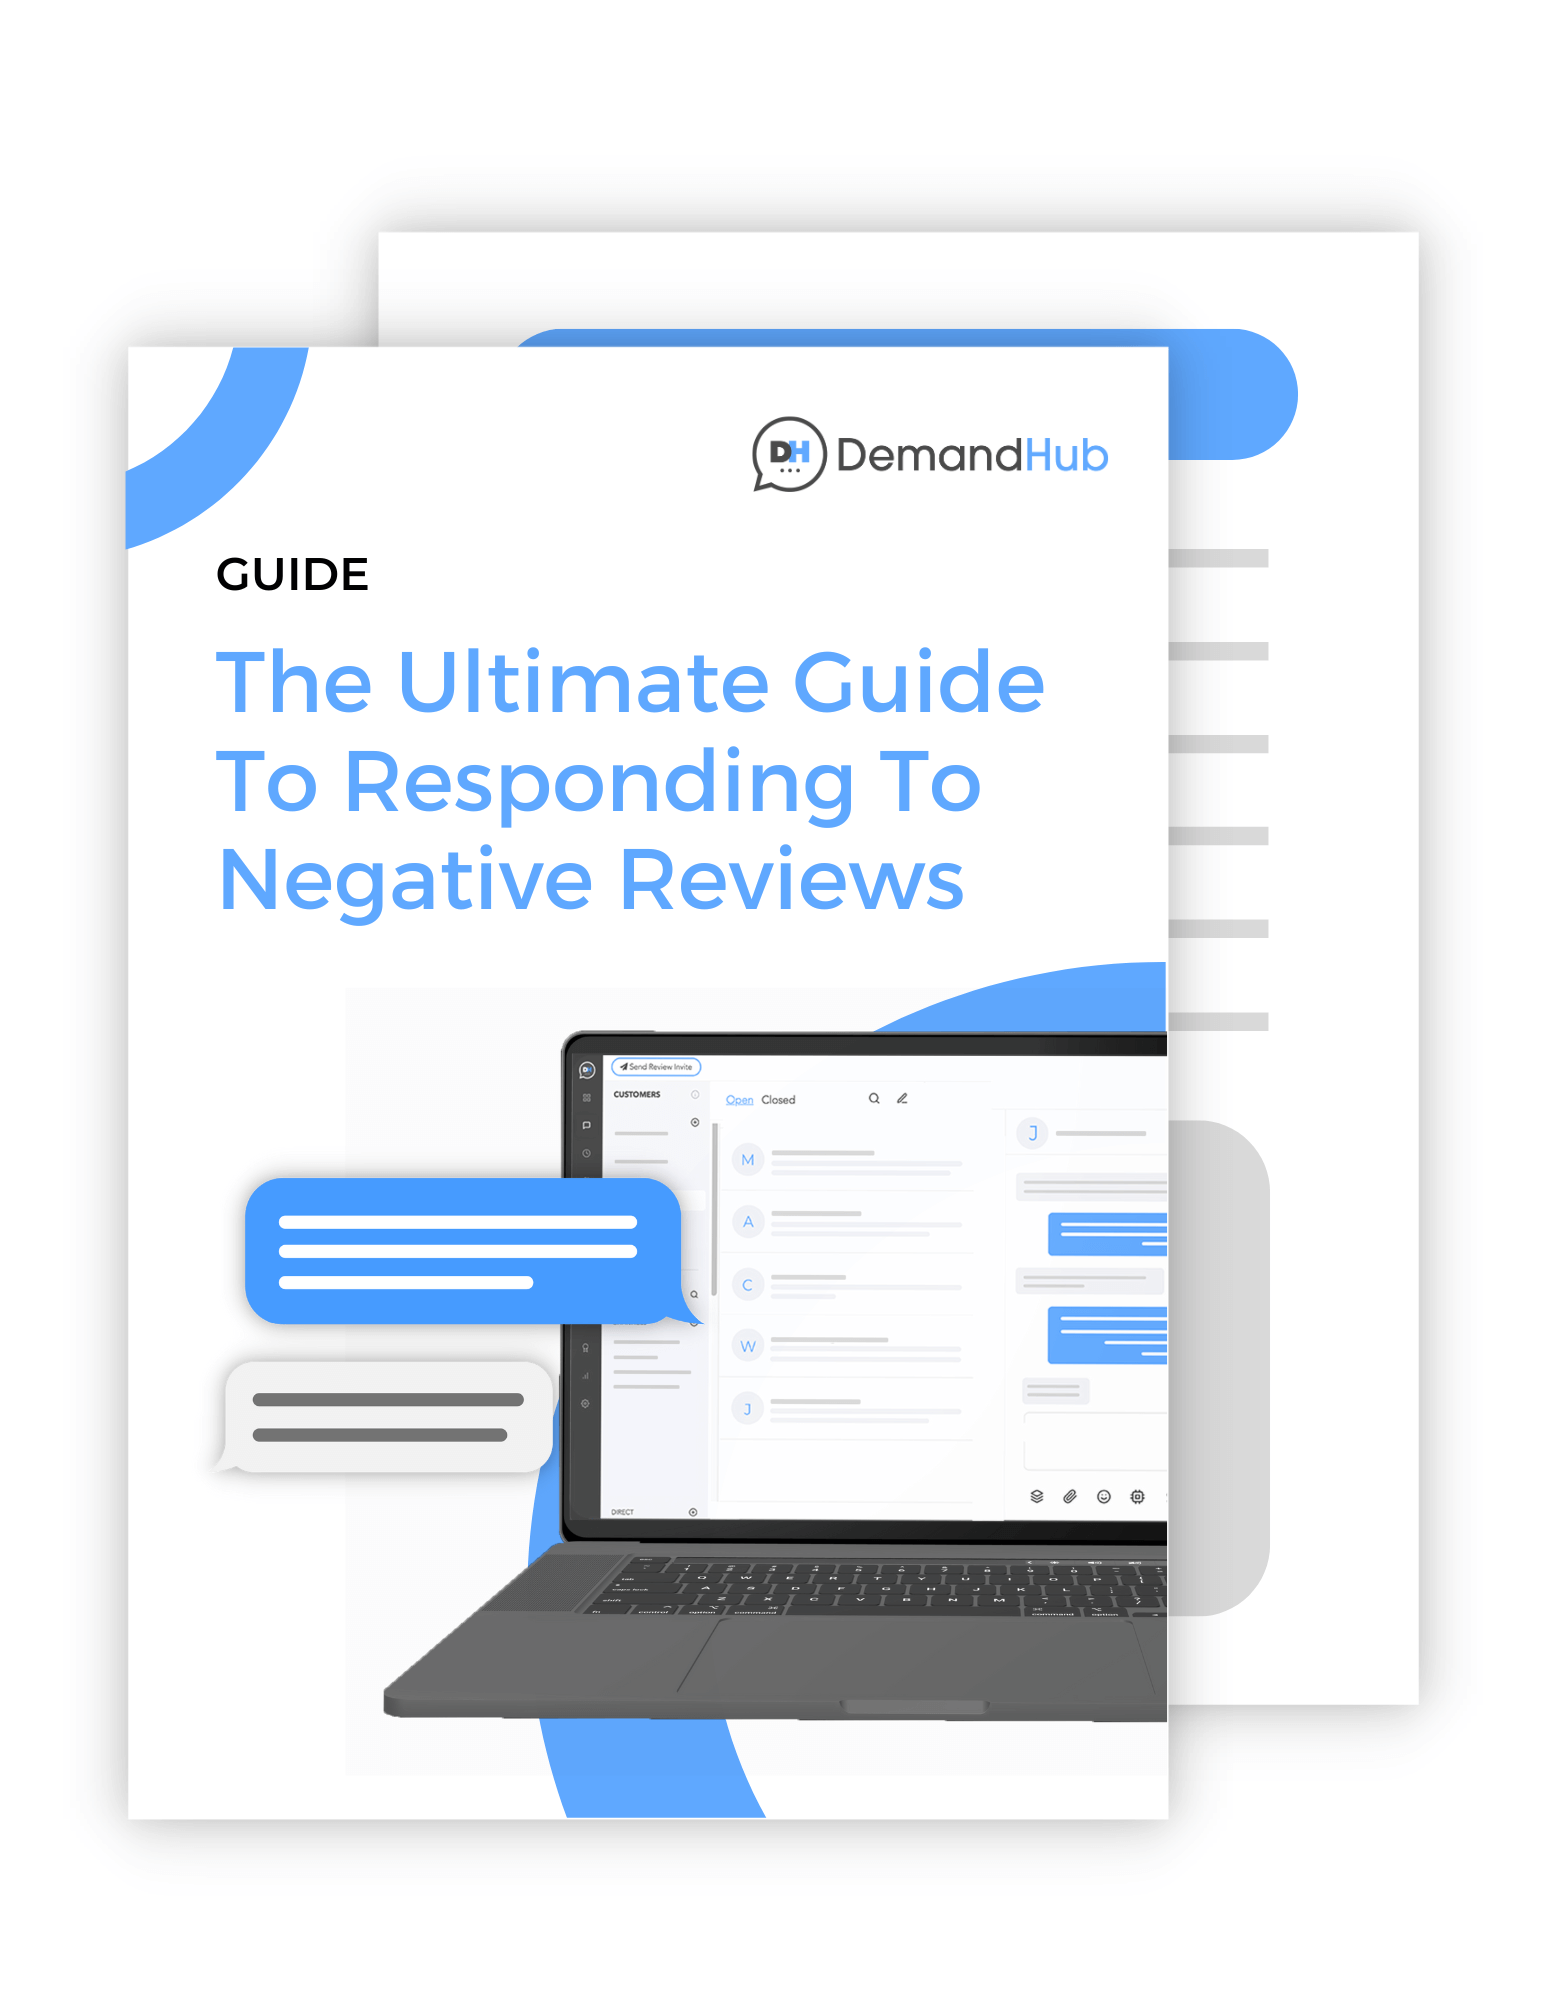 The Ultimate Guide to Responding to Negative Online Customer Reviews